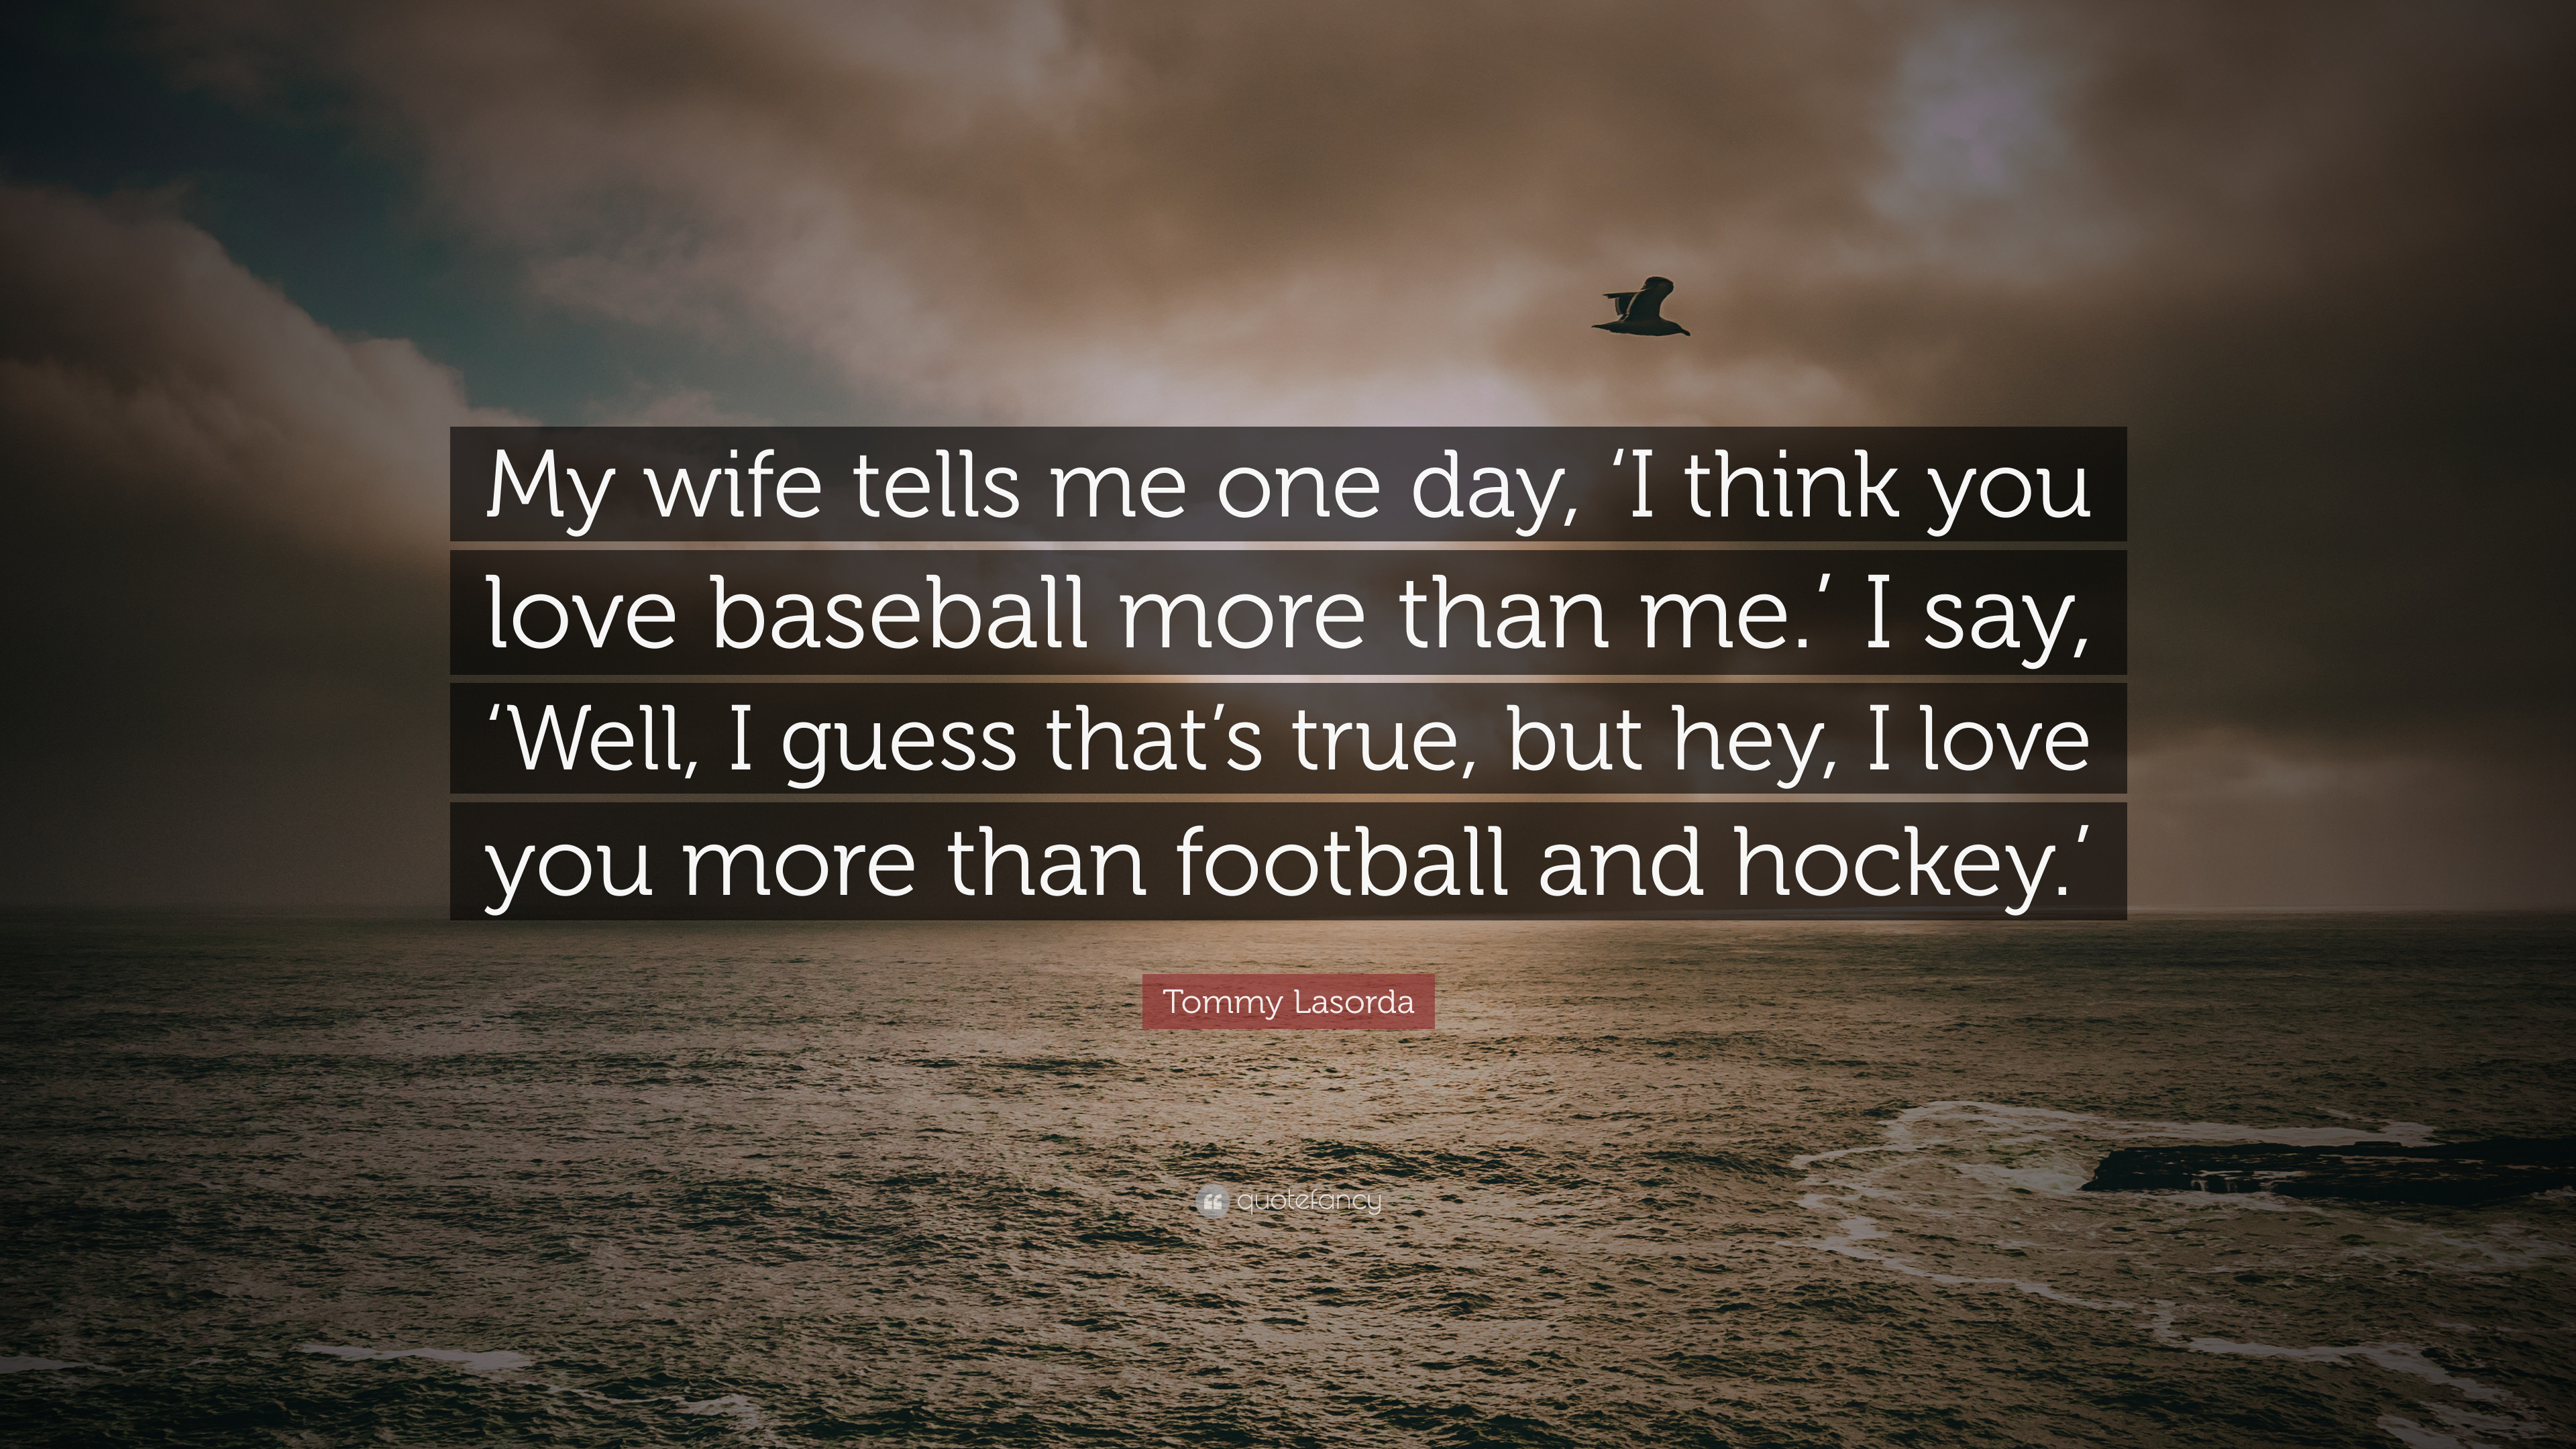 3840x2160 Tommy Lasorda Quote: “My wife tells me one day, 'I think you